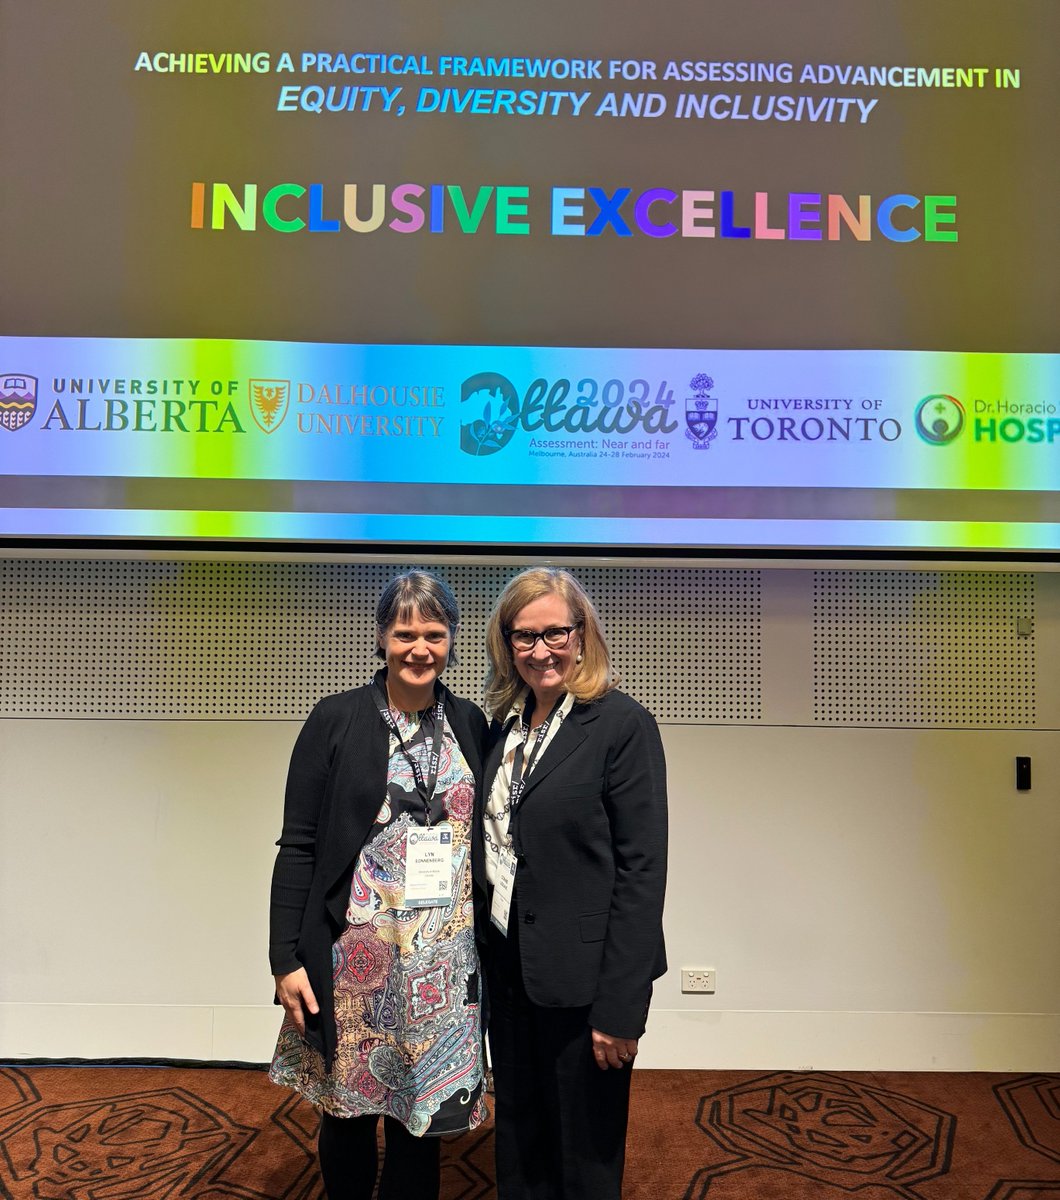 Today we conducted a workshop in Inclusive Excellence to an international audience of healthcare professionals and researchers in Melbourne. A great conversation!